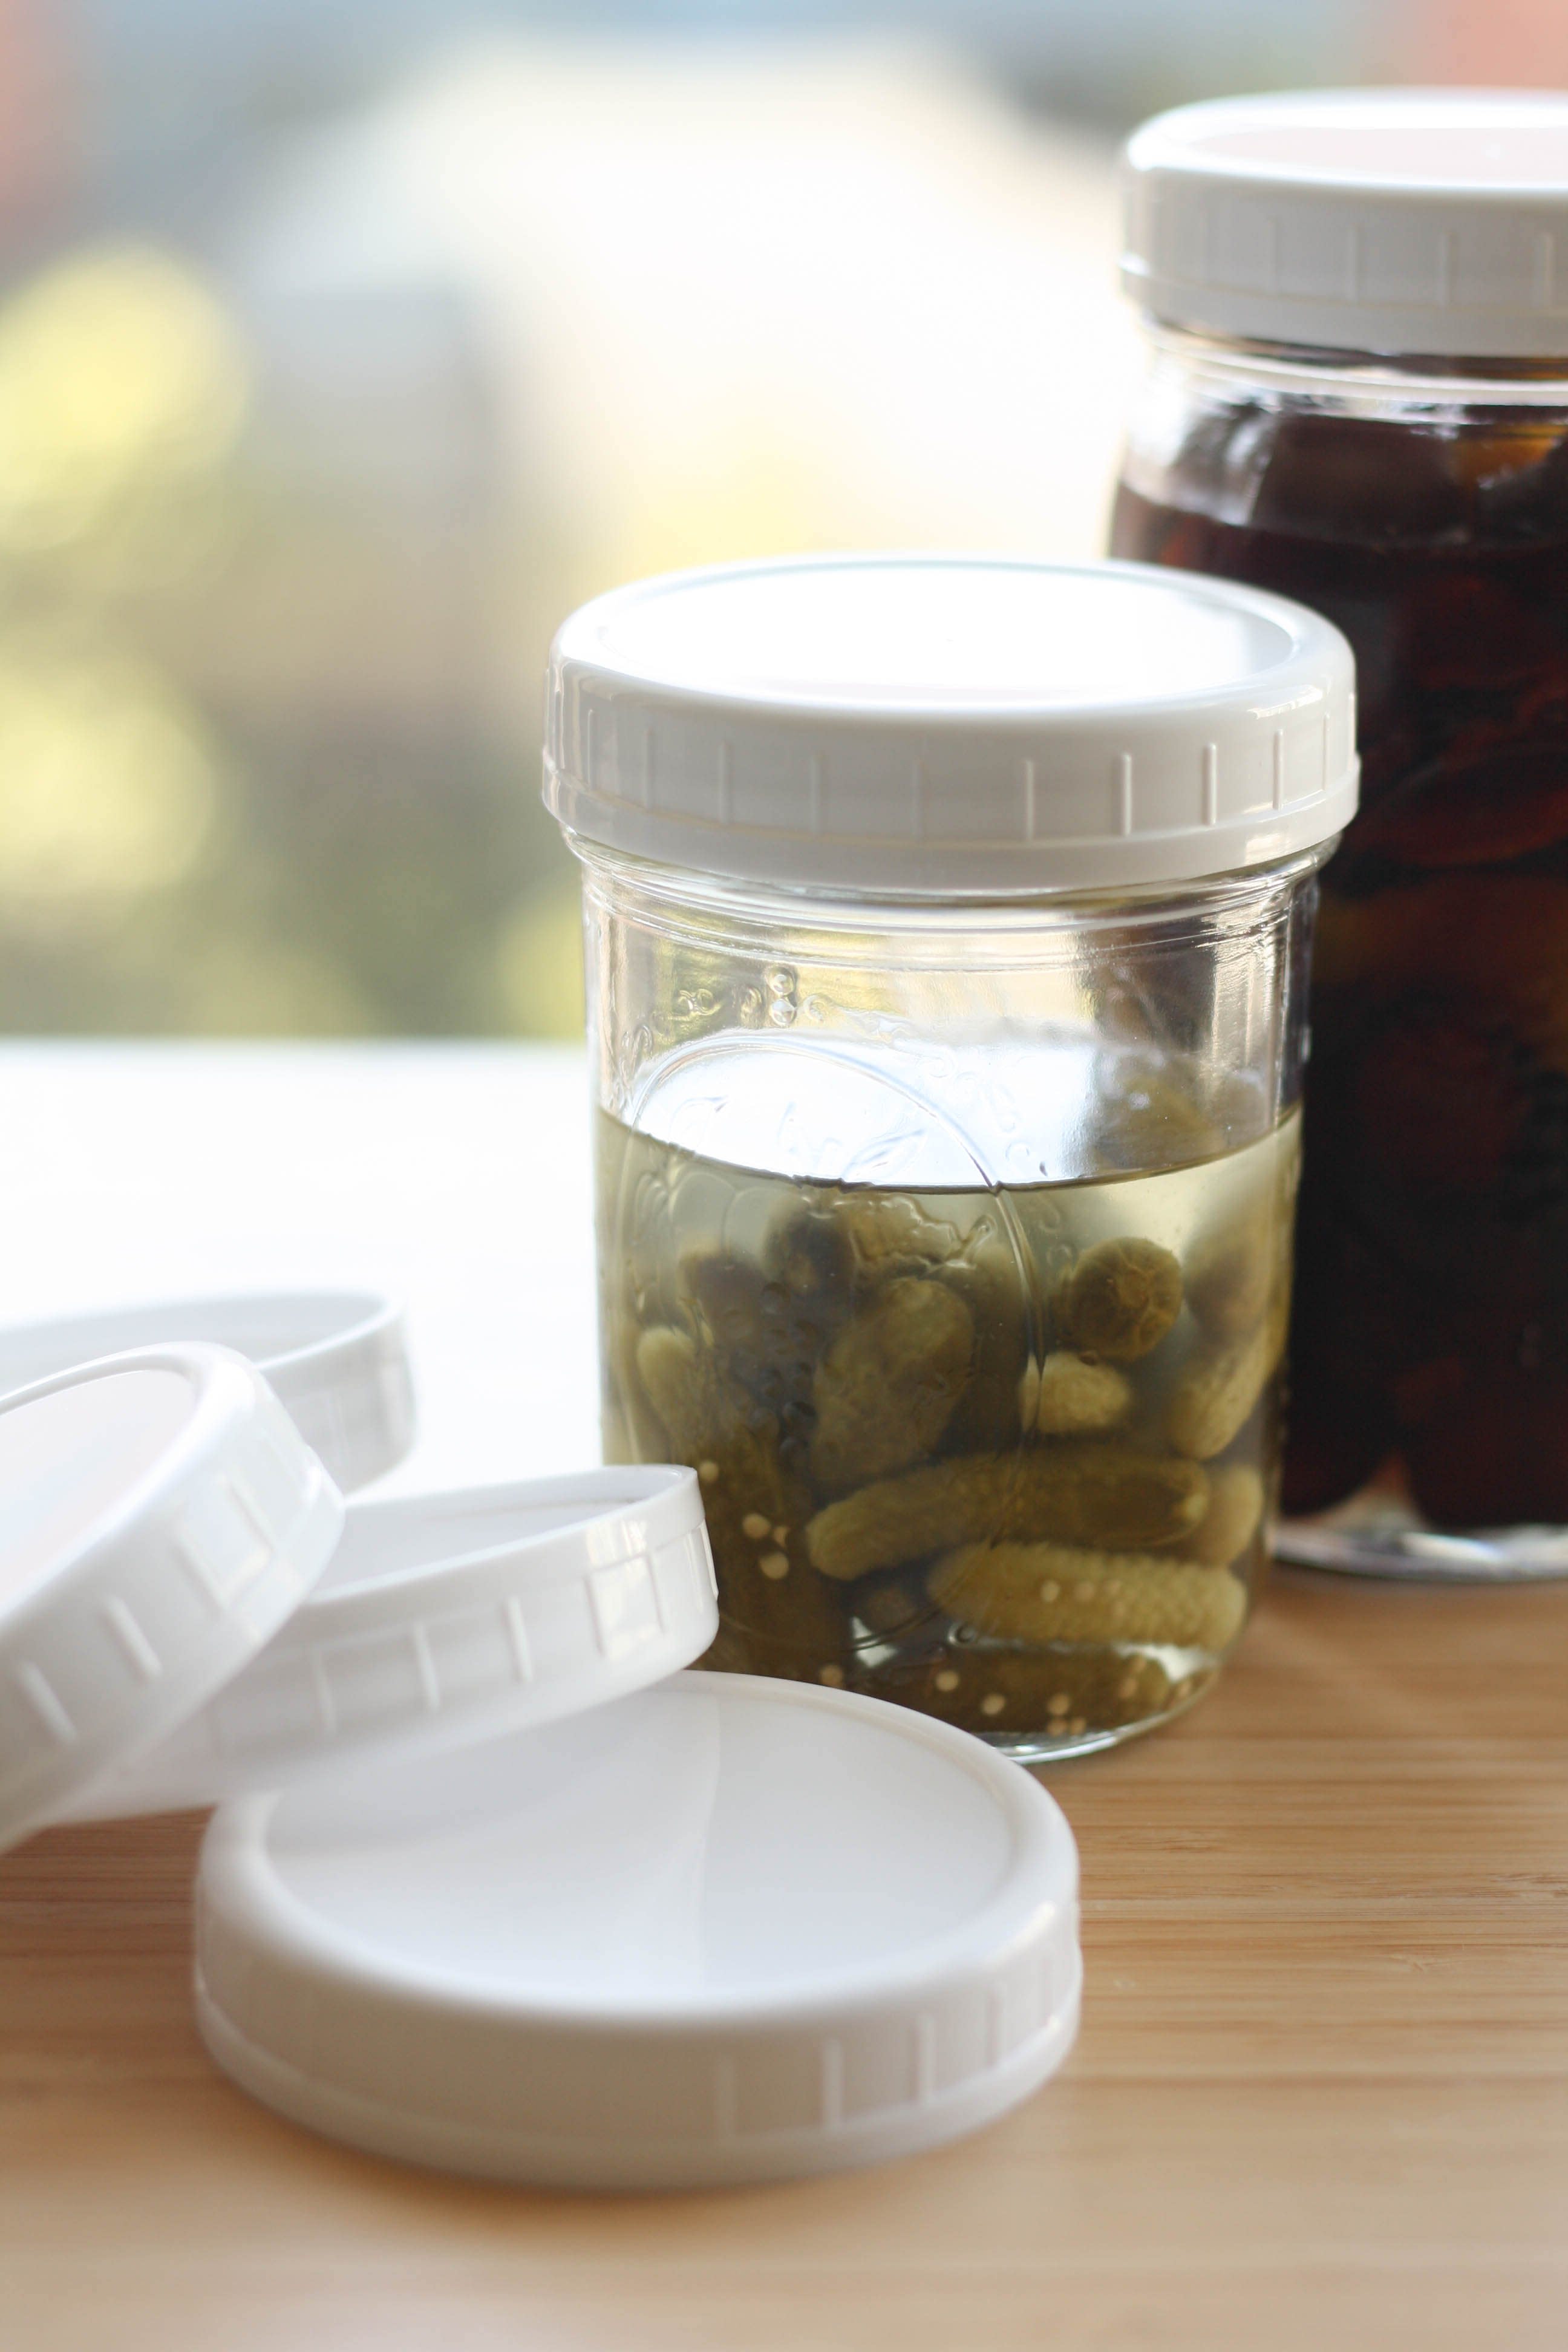 Is It Ever Okay To Use Plastic Caps When Canning At Home?